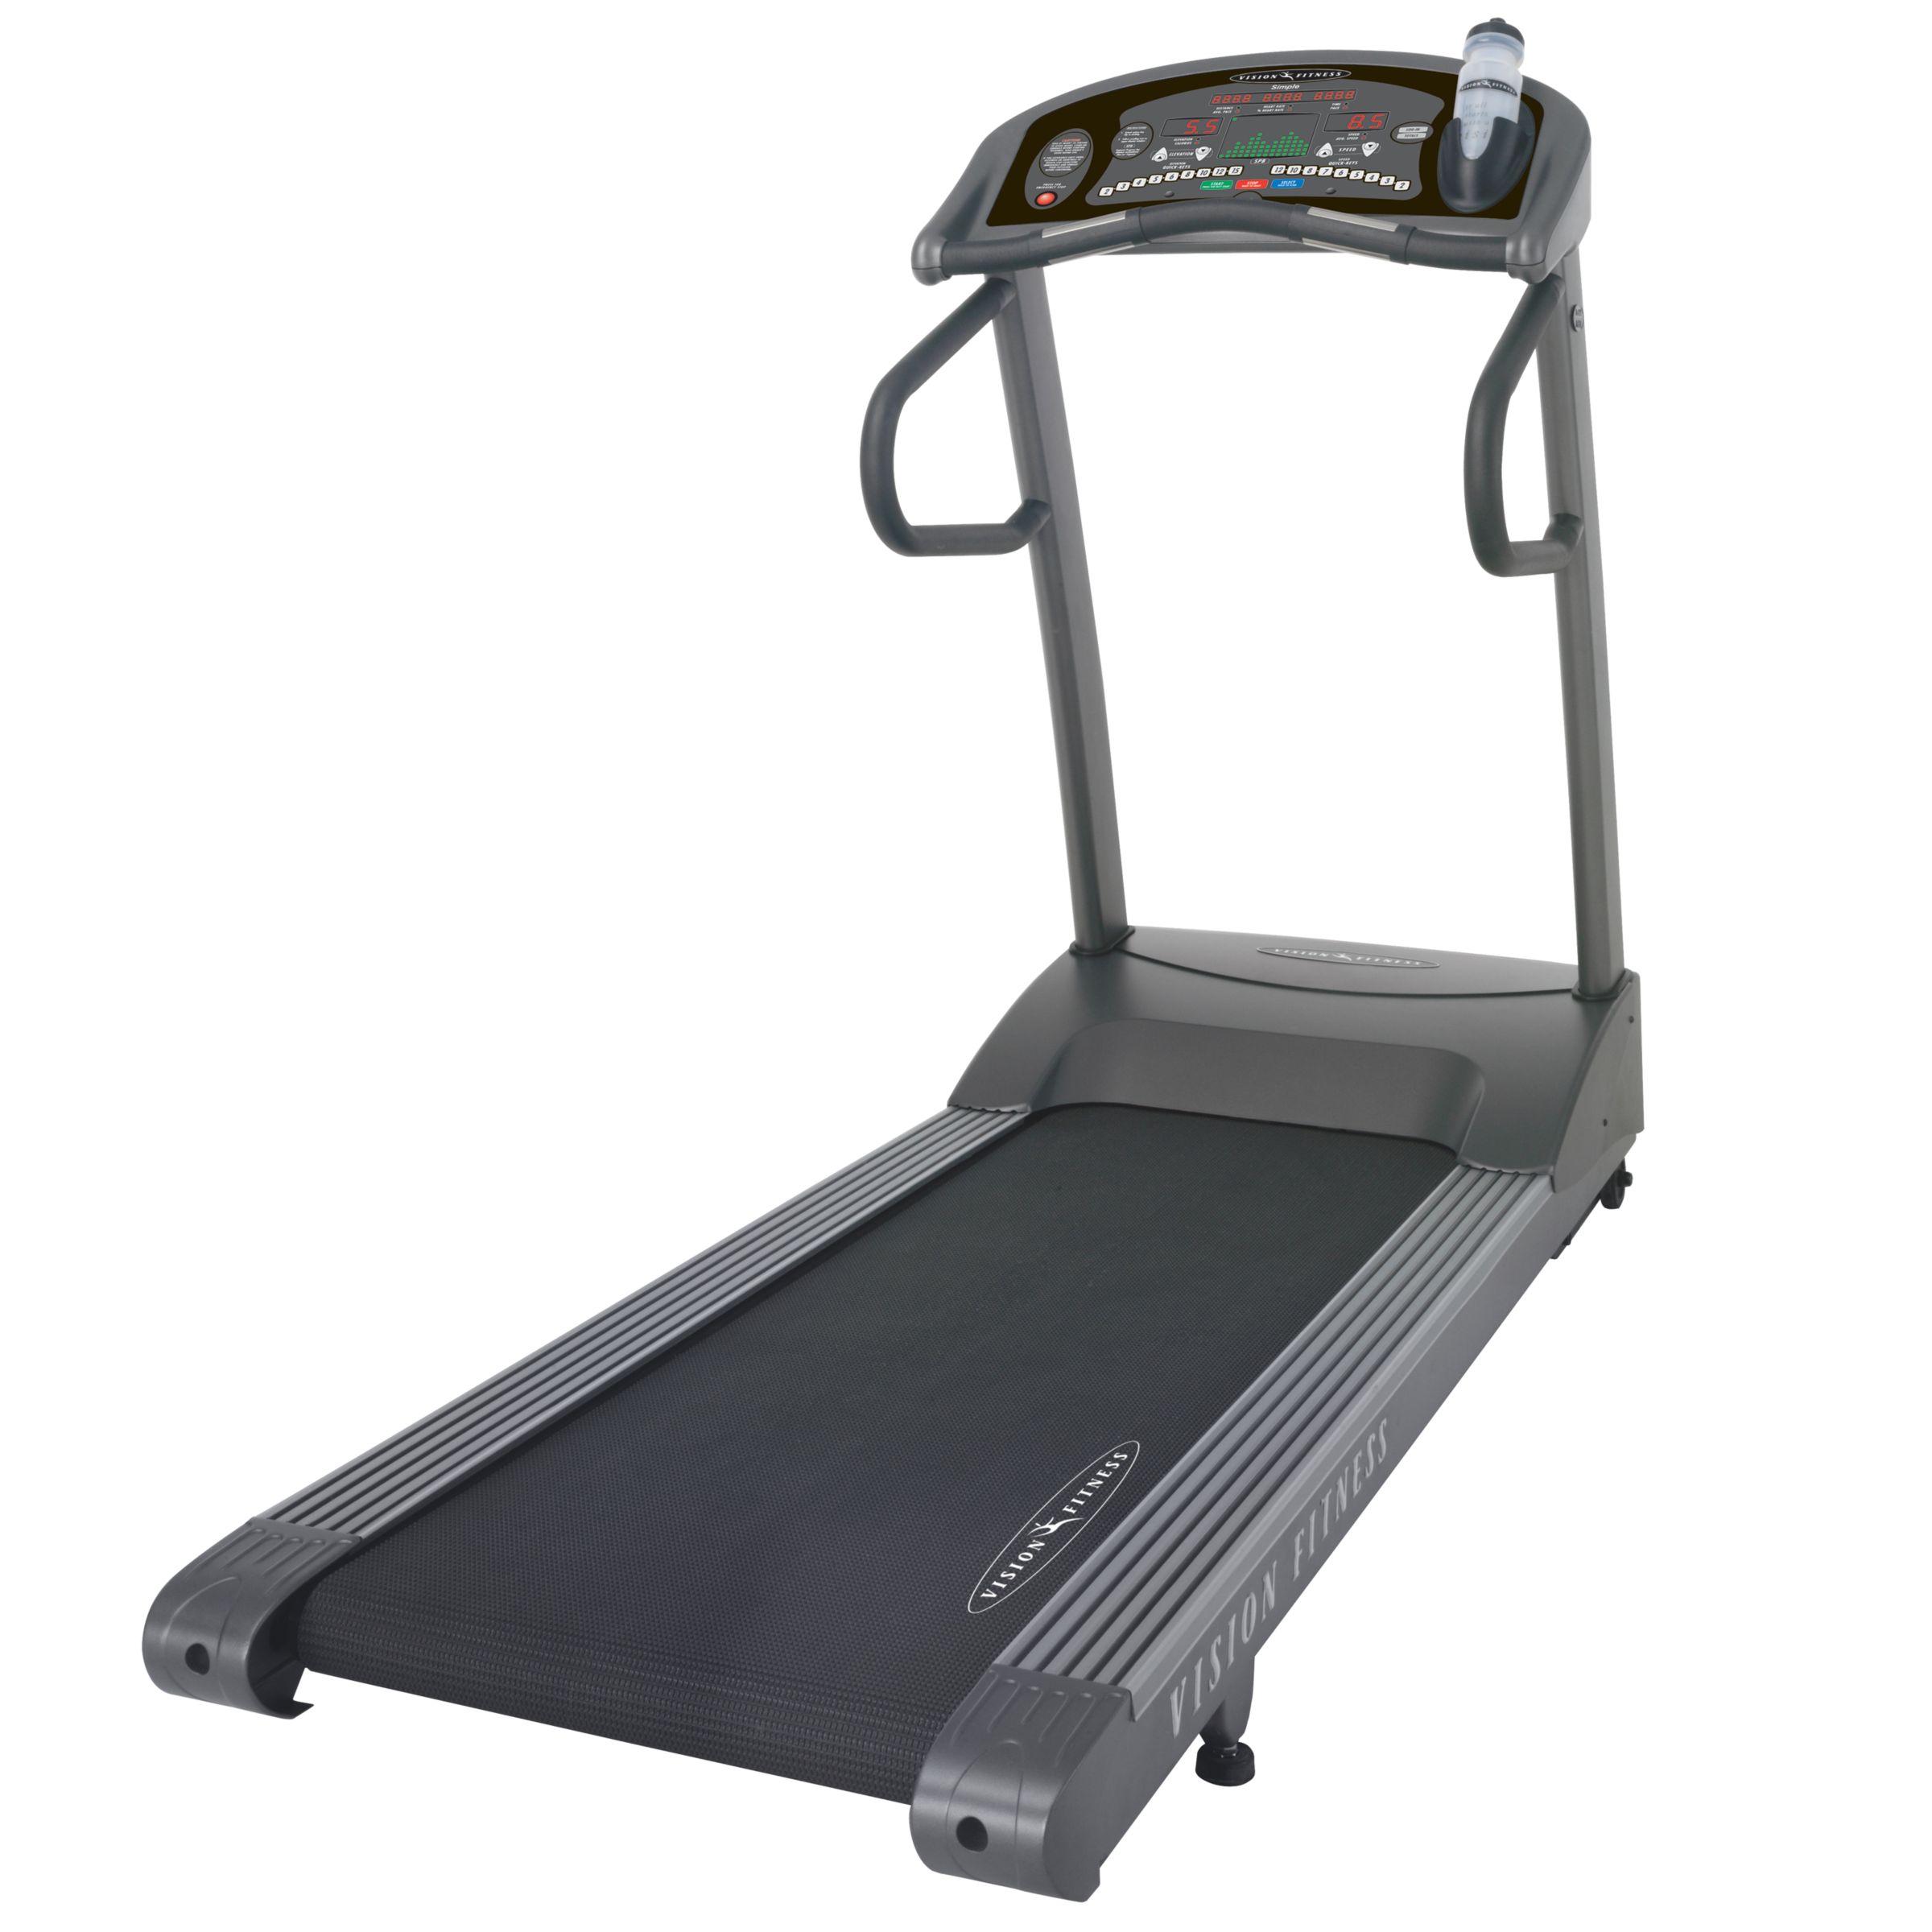 Vision Fitness T9700S Treadmill at JohnLewis